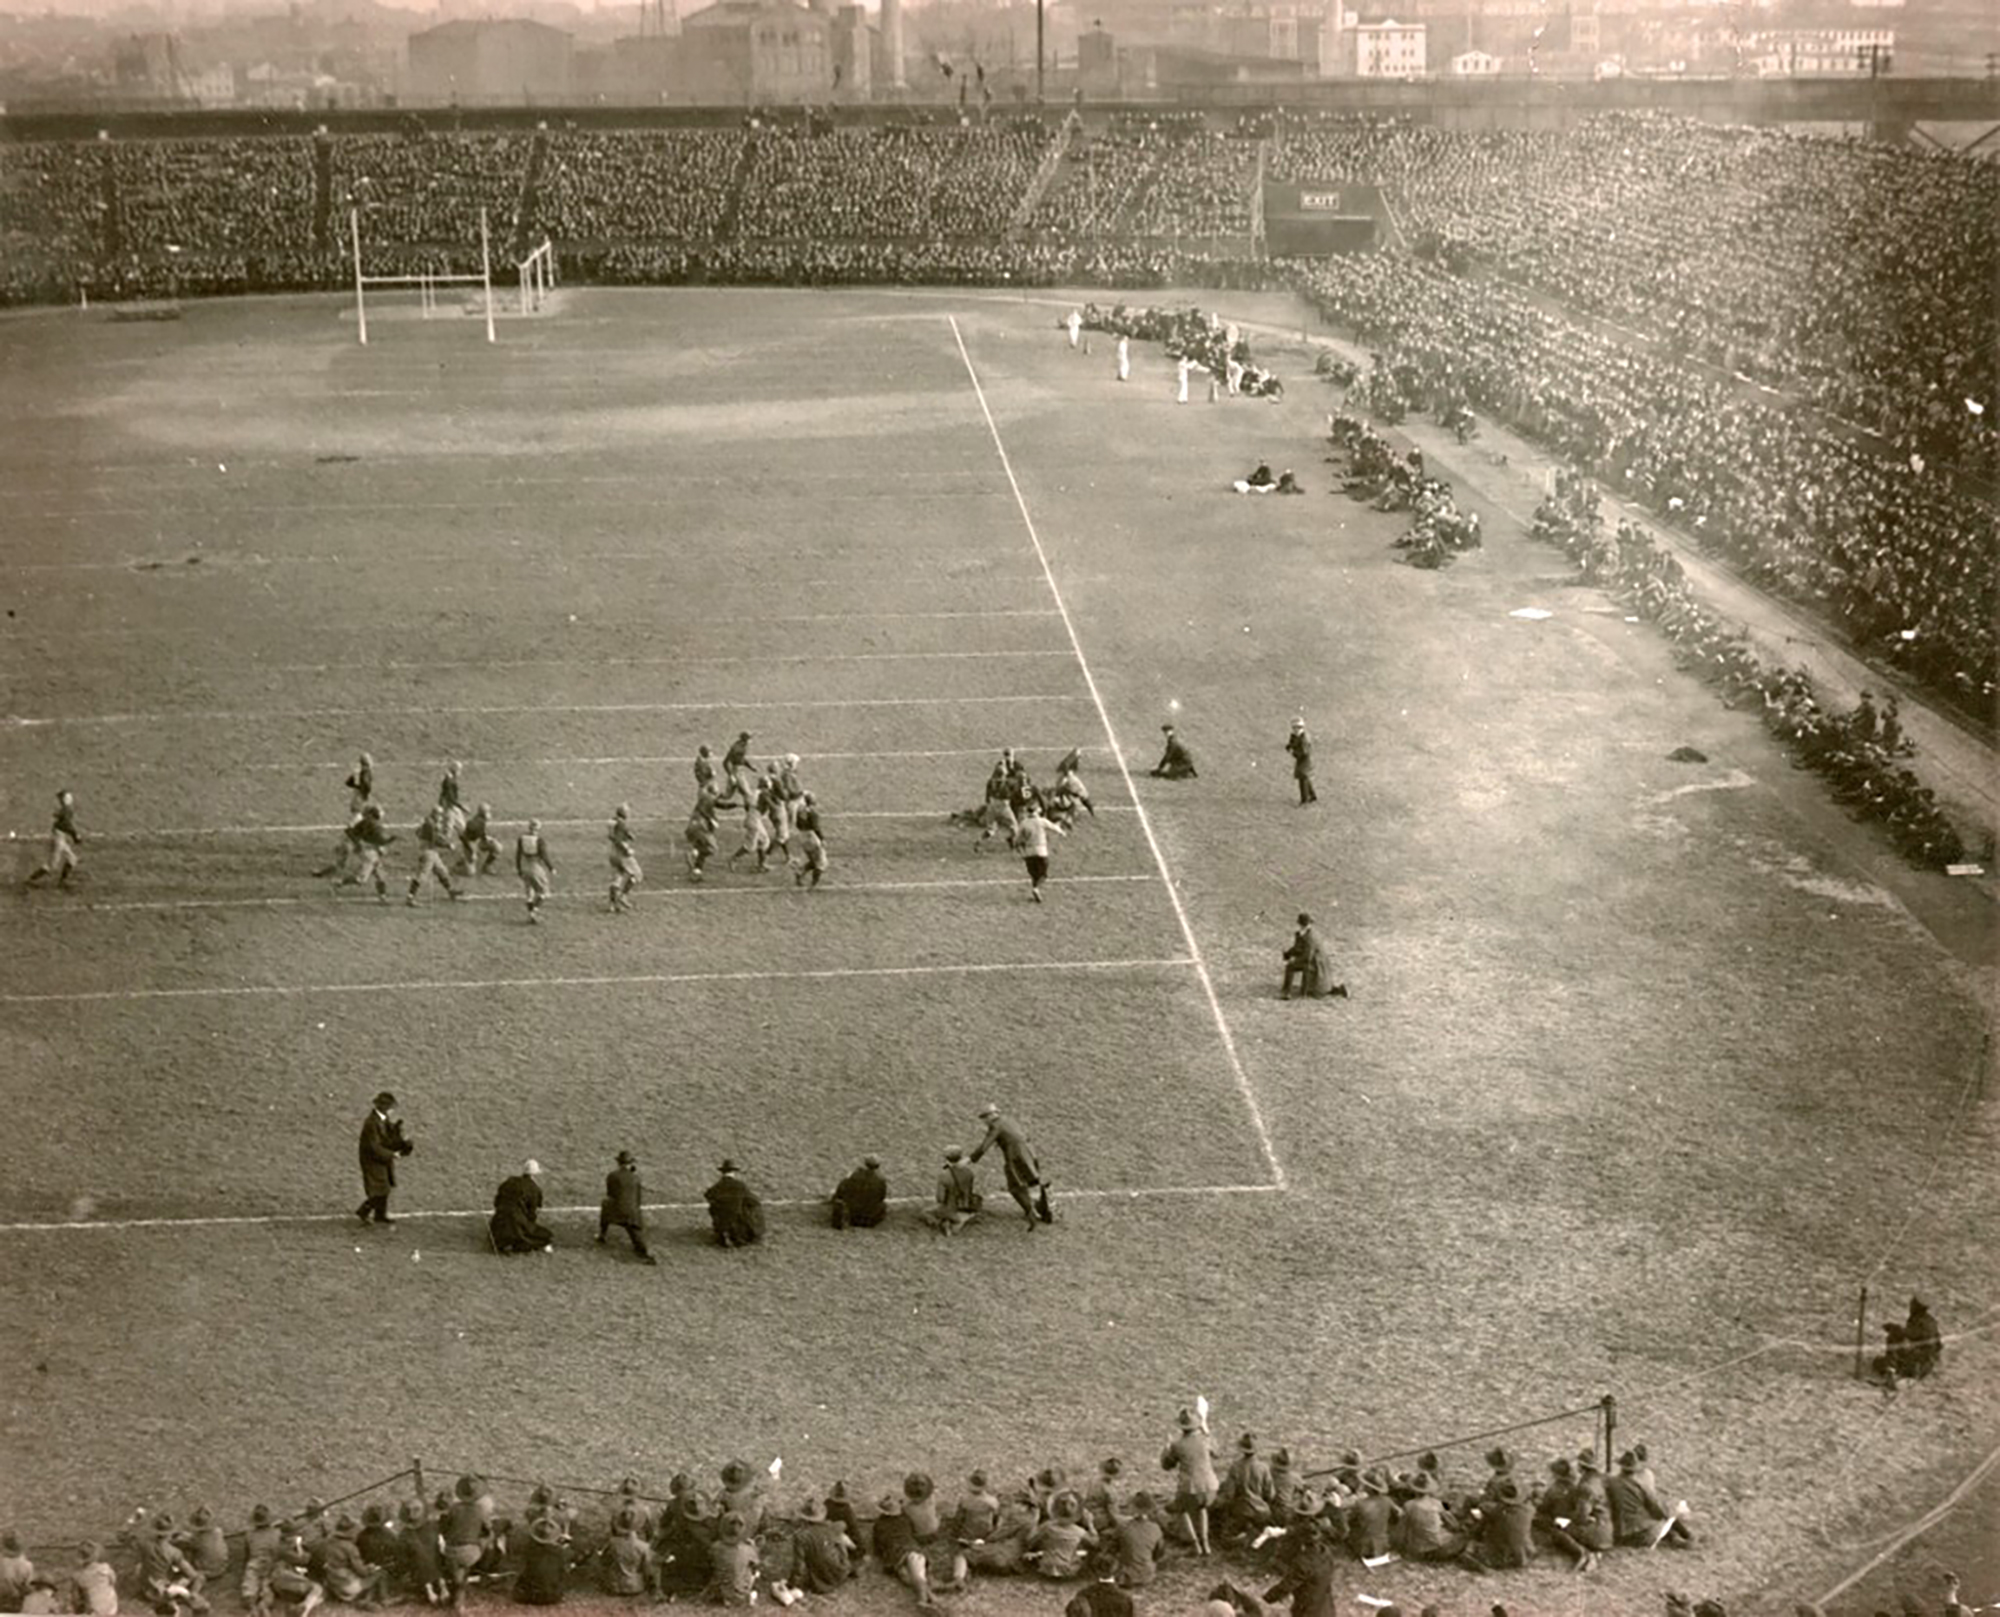 ooking east toward the Center City skyline from top of west end of the Franklin Field stands, the Penn football team takes on an unidentified team circa 1915. 